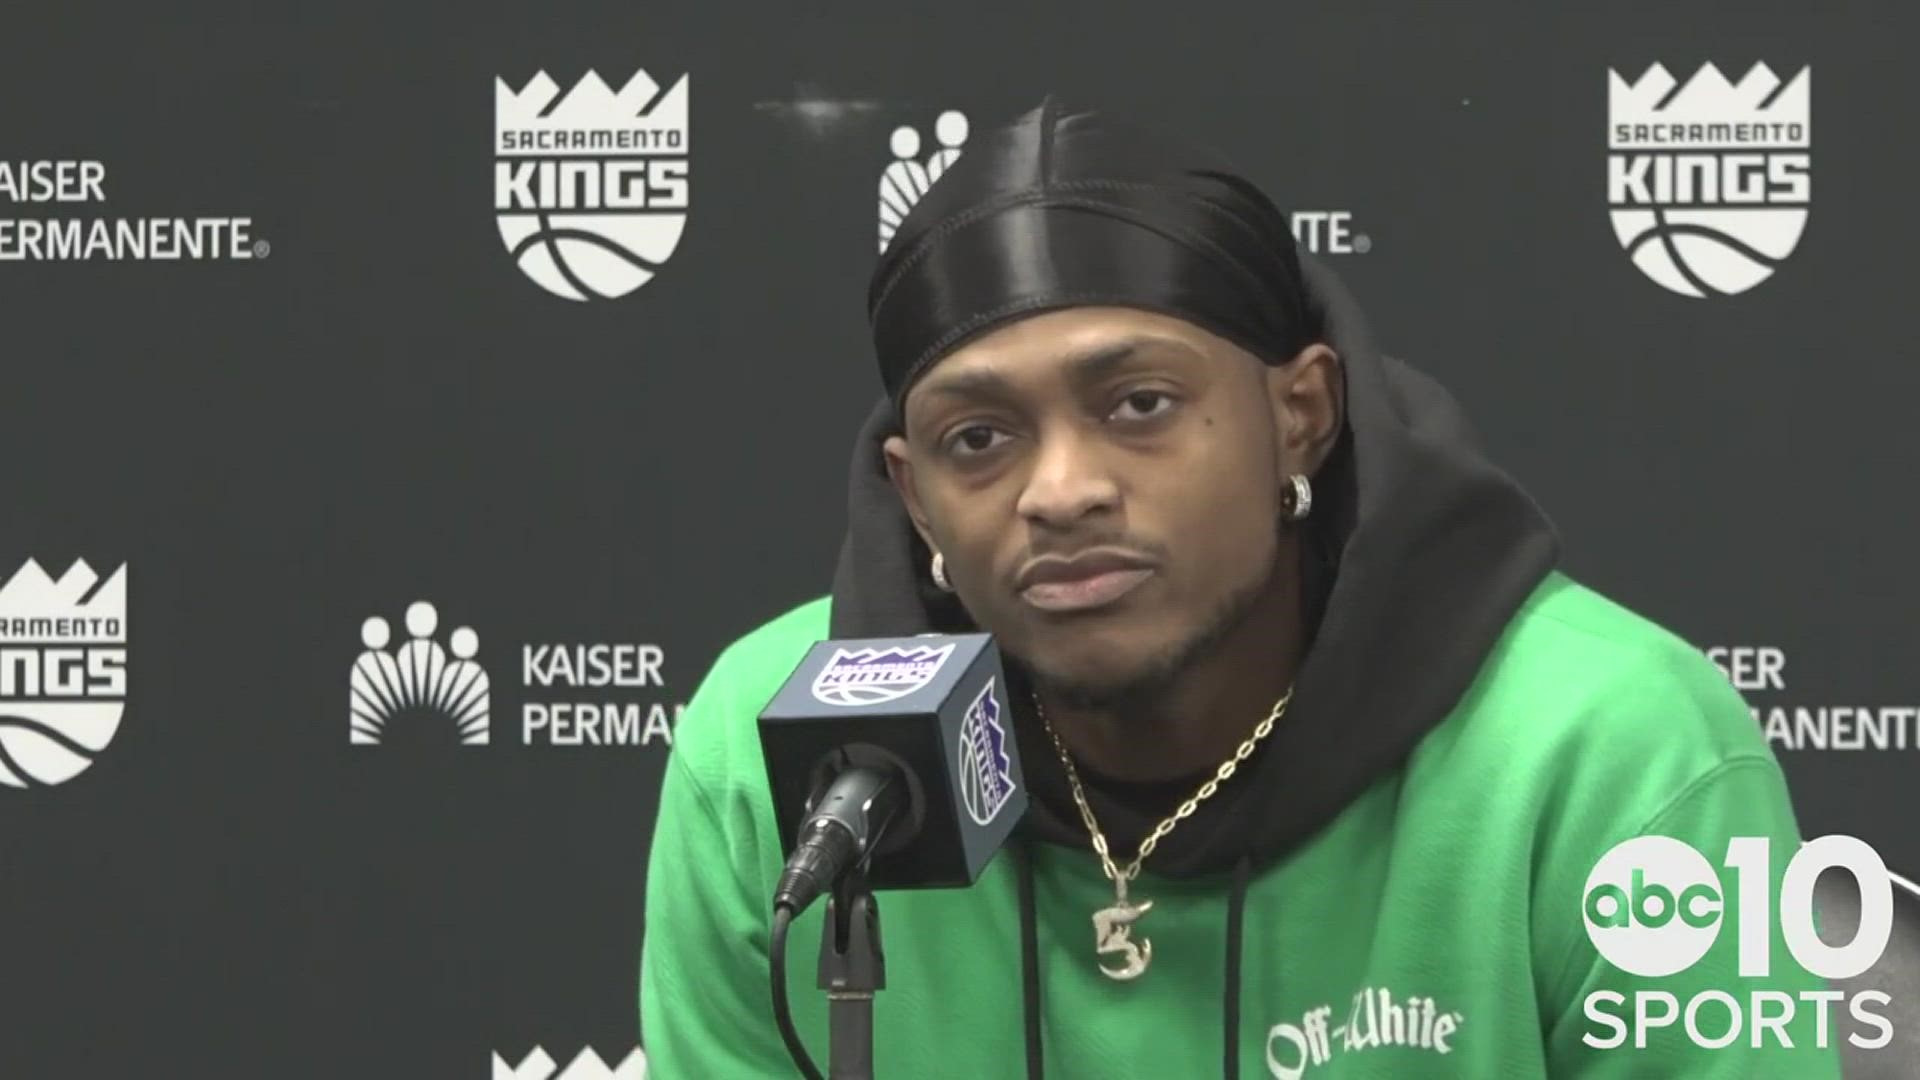 Kings PG De'Aaron Fox talks about Wednesday's 108-102 loss to a COVID-19 depleted Atlanta Hawks team and his 30 point performance coming up short.